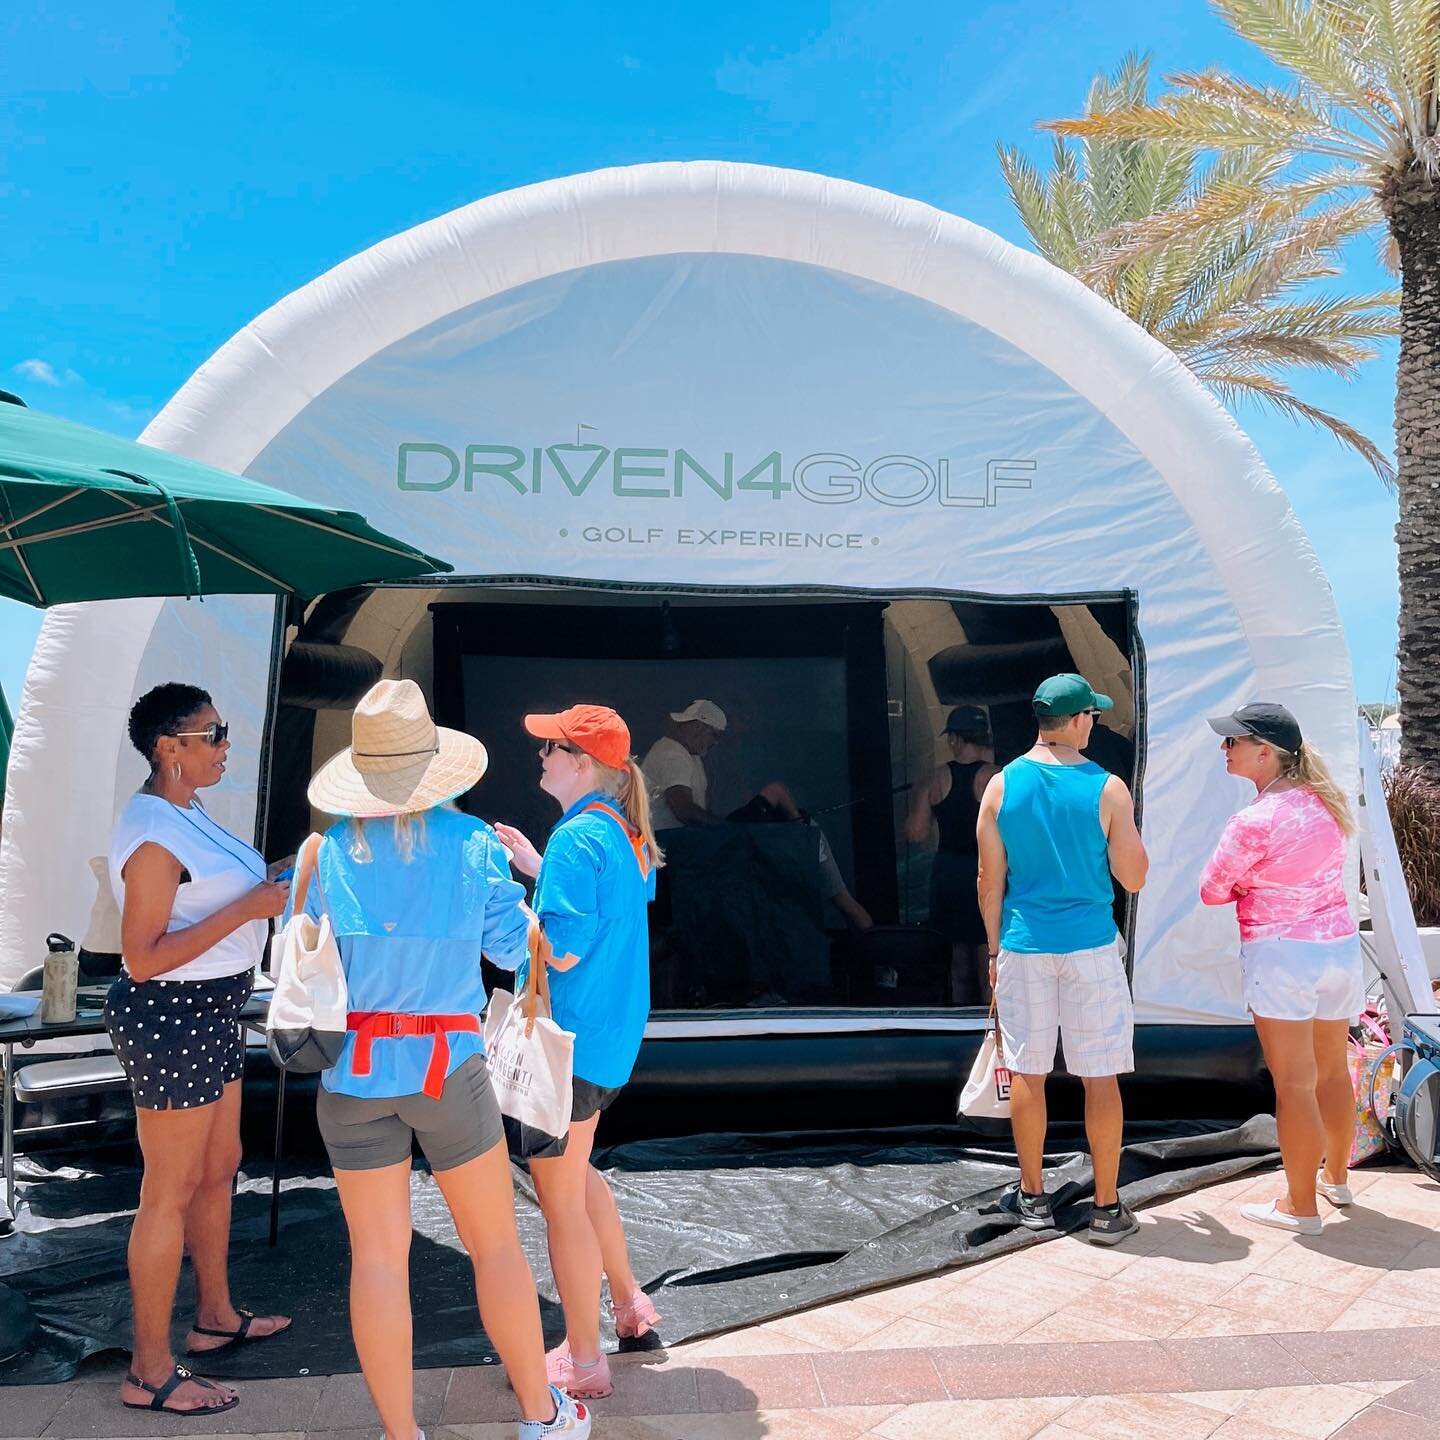 Summer Dates are starting to fill up 🌞🏌🏼&zwj;♂️

If you&rsquo;ve got an upcoming event our Mobile Golf Simulator is the best addition to have something fun for your guests to do! Play longest drive, closest to the pin, or more fun games! 

BOOK NO